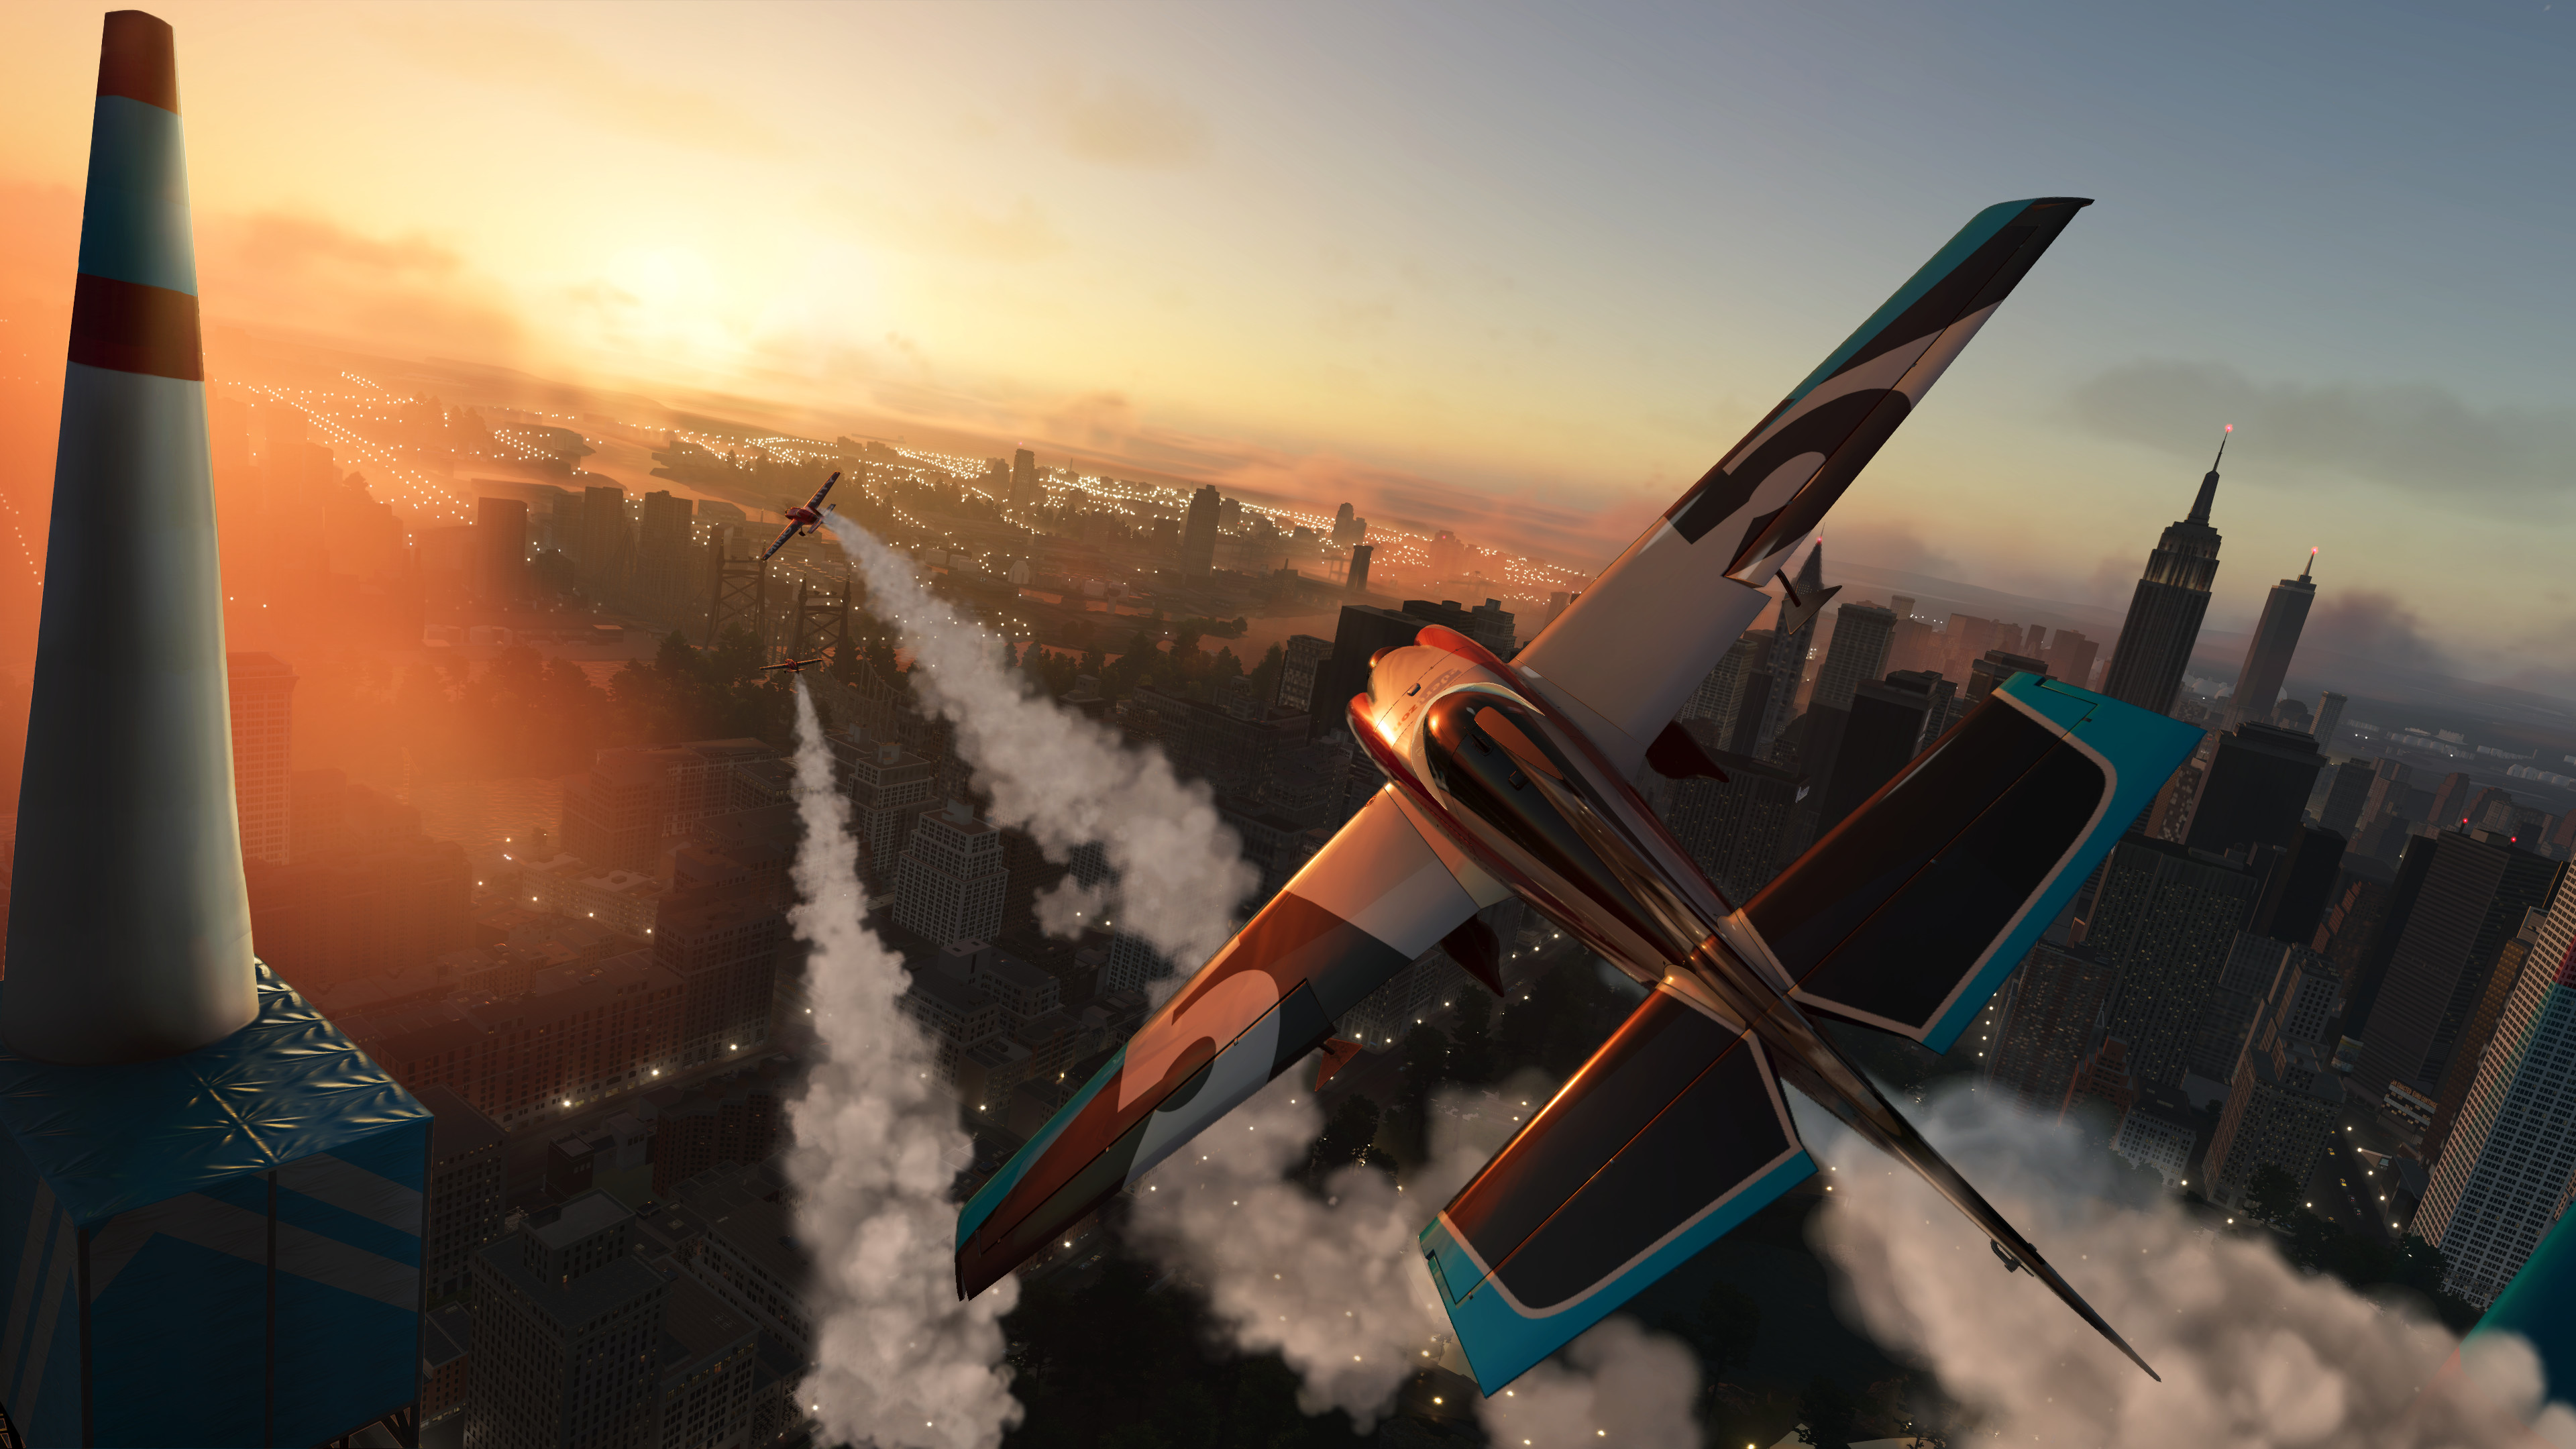 real flight simulator free download for pc